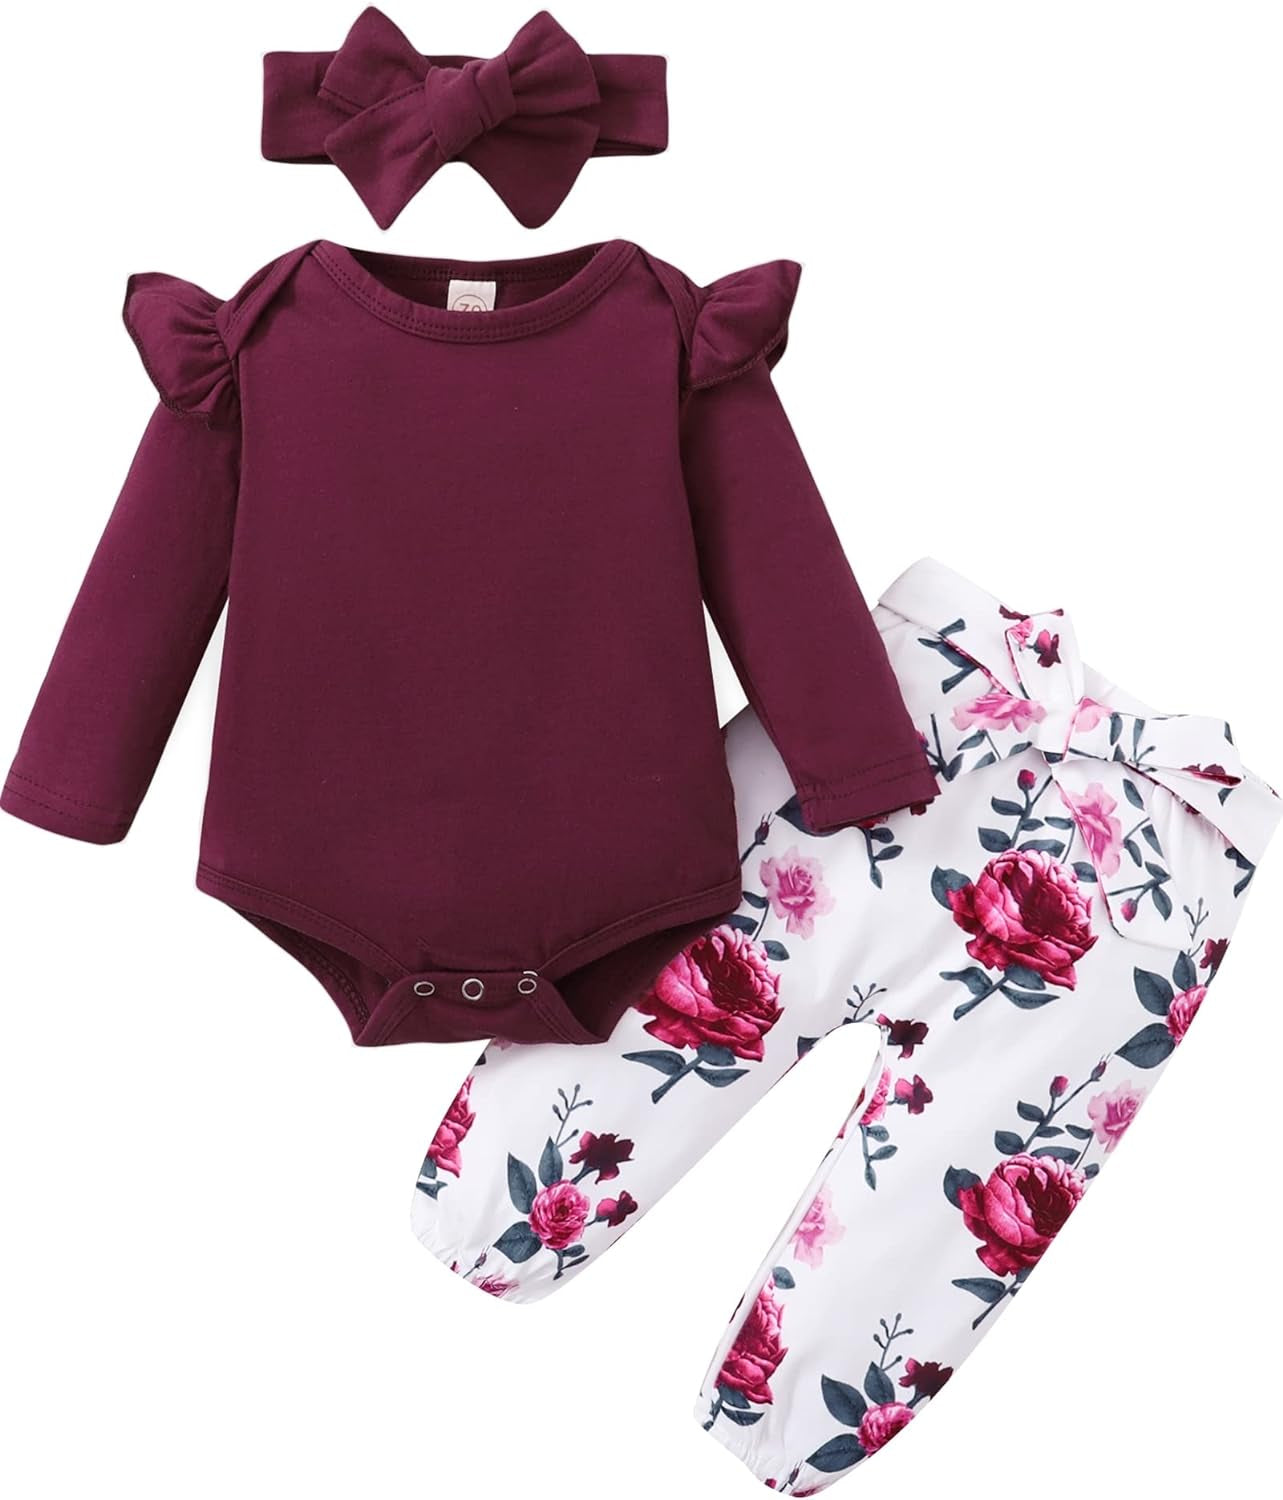 Baby Girl Outfits Infant Mama Girl Baby Clothes Ruffle Romper Camo Pants Set Cute Girl Outfit 3-6 Months Girl Clothes